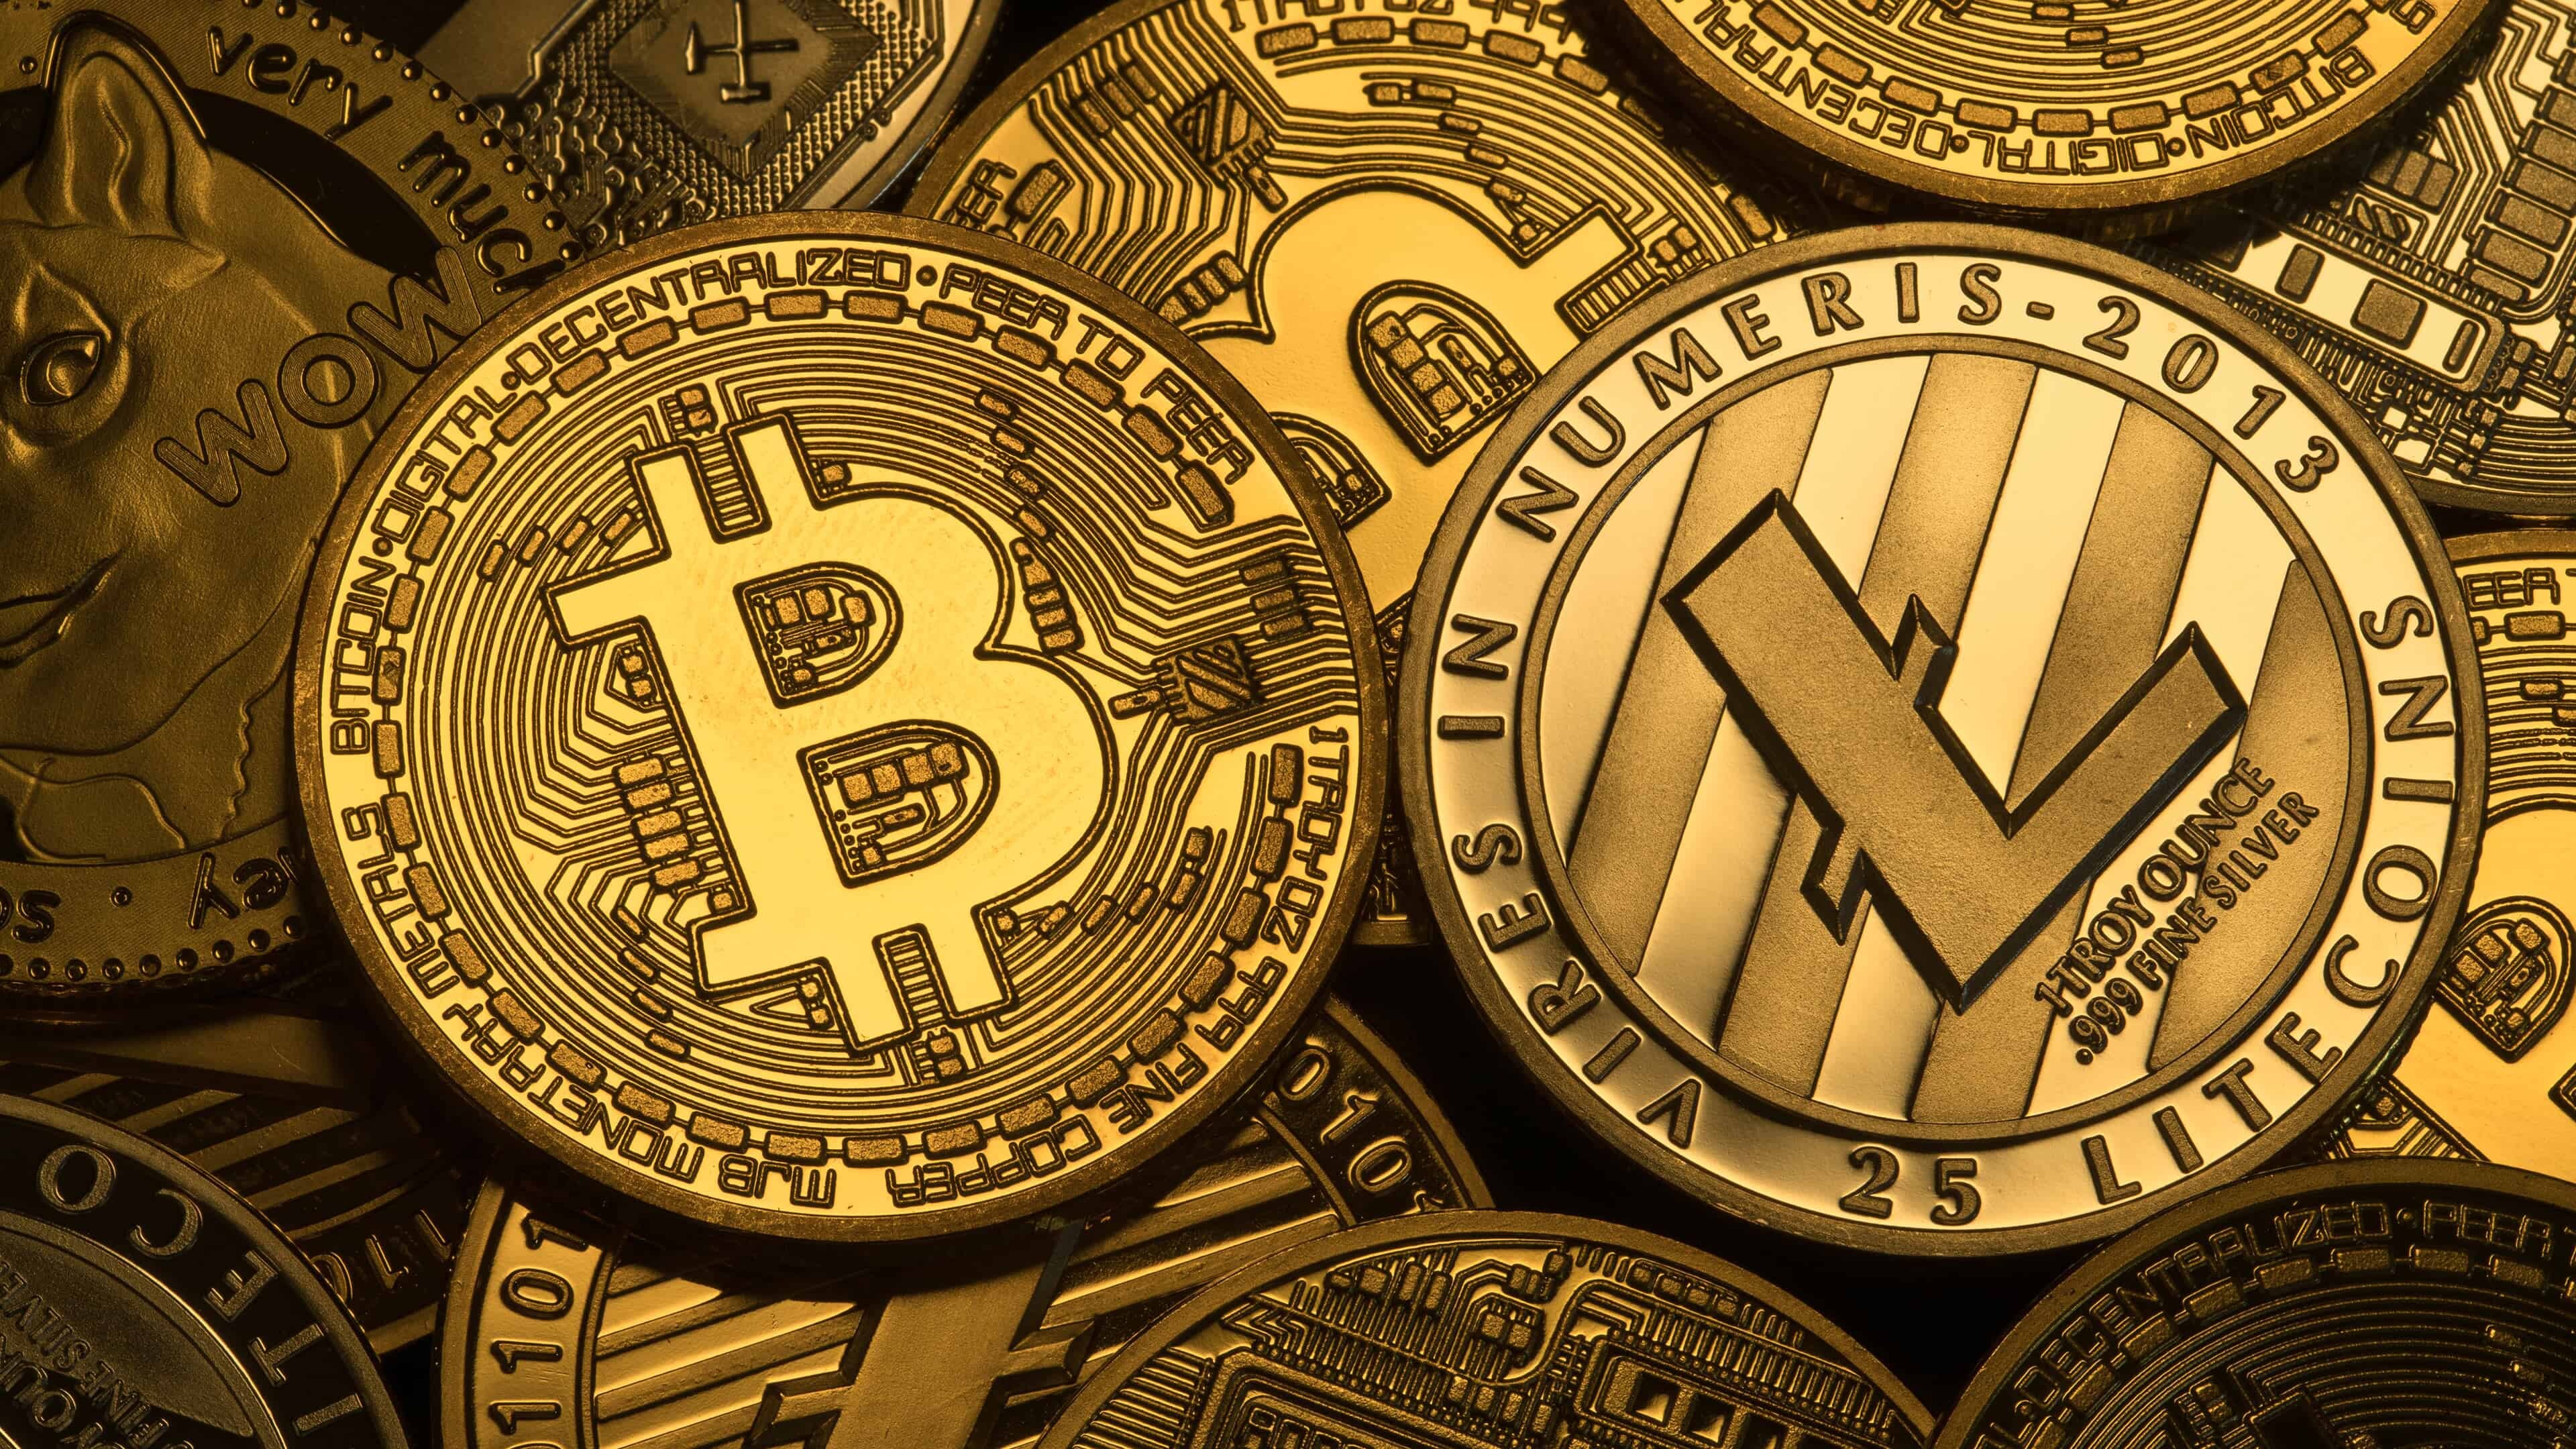 Cryptocurrency: A digital currency, Transactions are verified and records maintained by a decentralized system using cryptography. 3840x2160 4K Wallpaper.